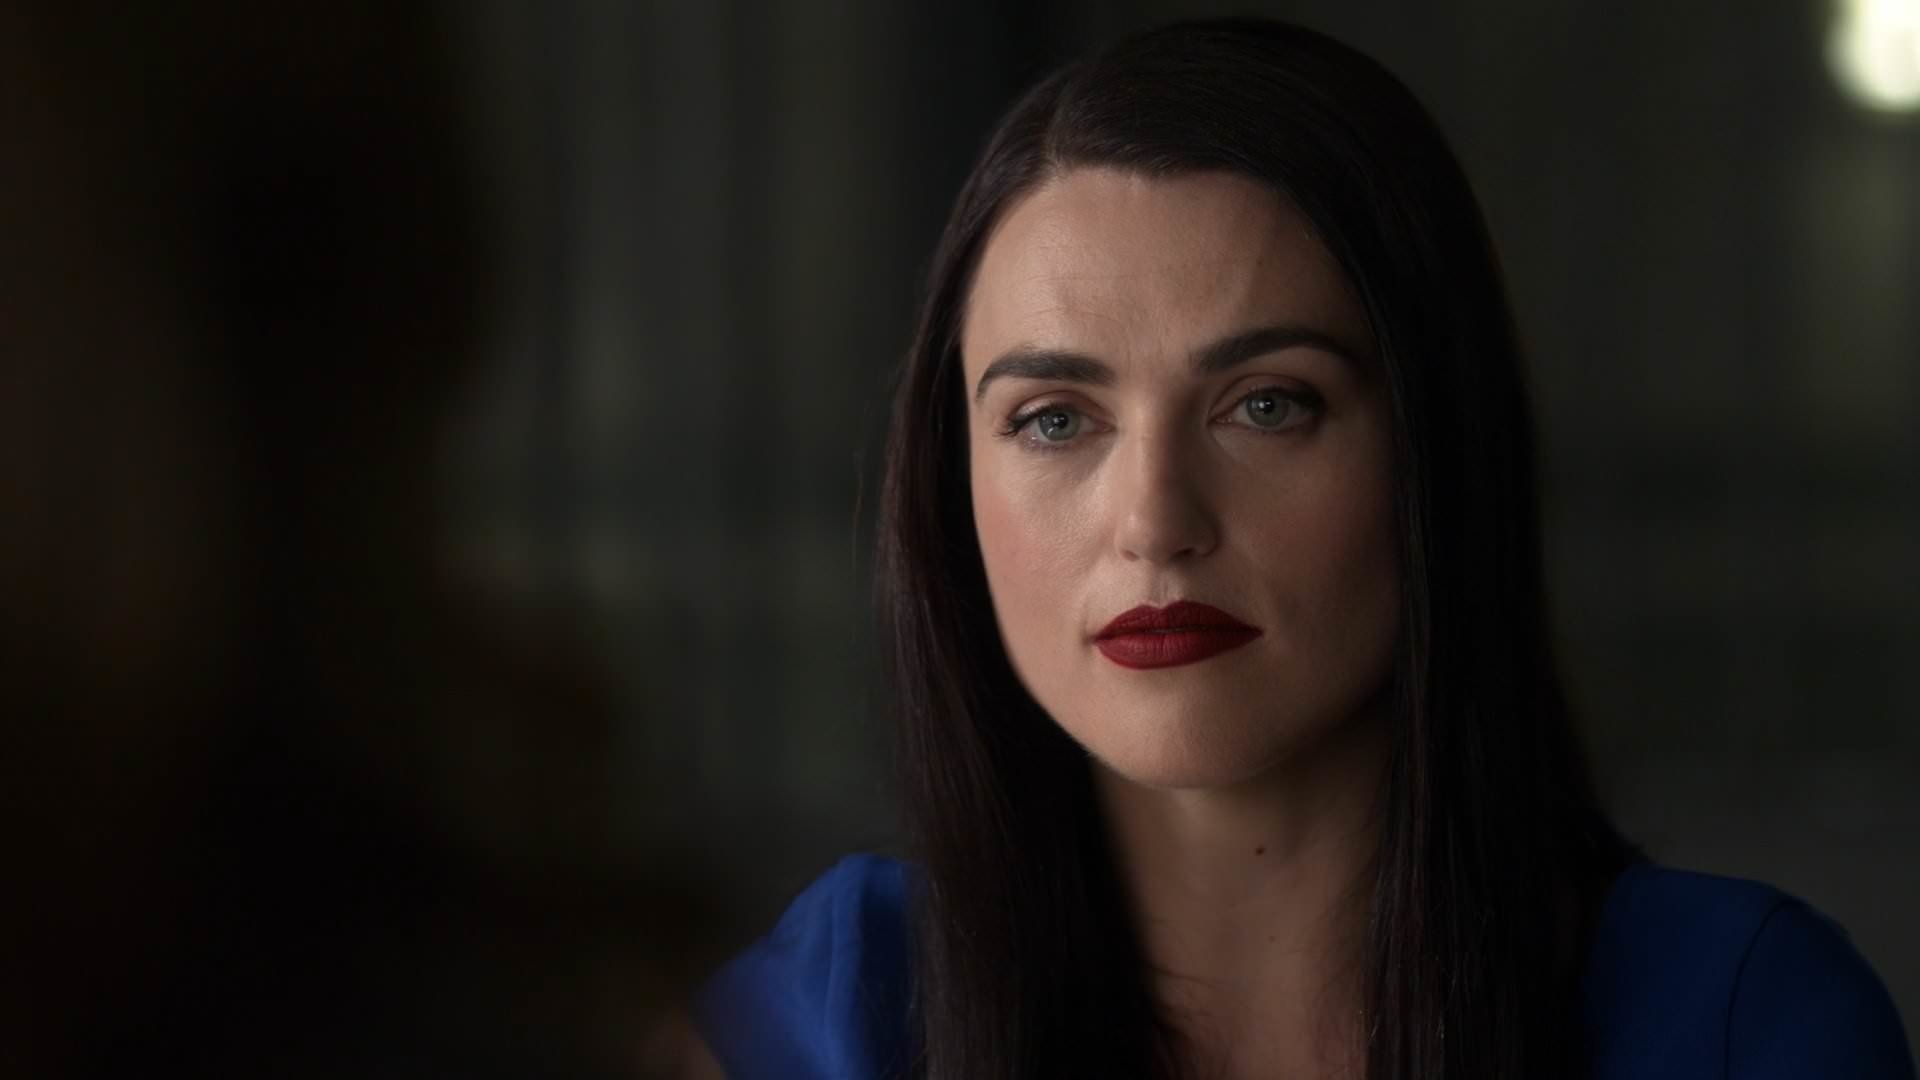 Supergirl - Lena Luthor Image - ID: 395056 - Image Abyss